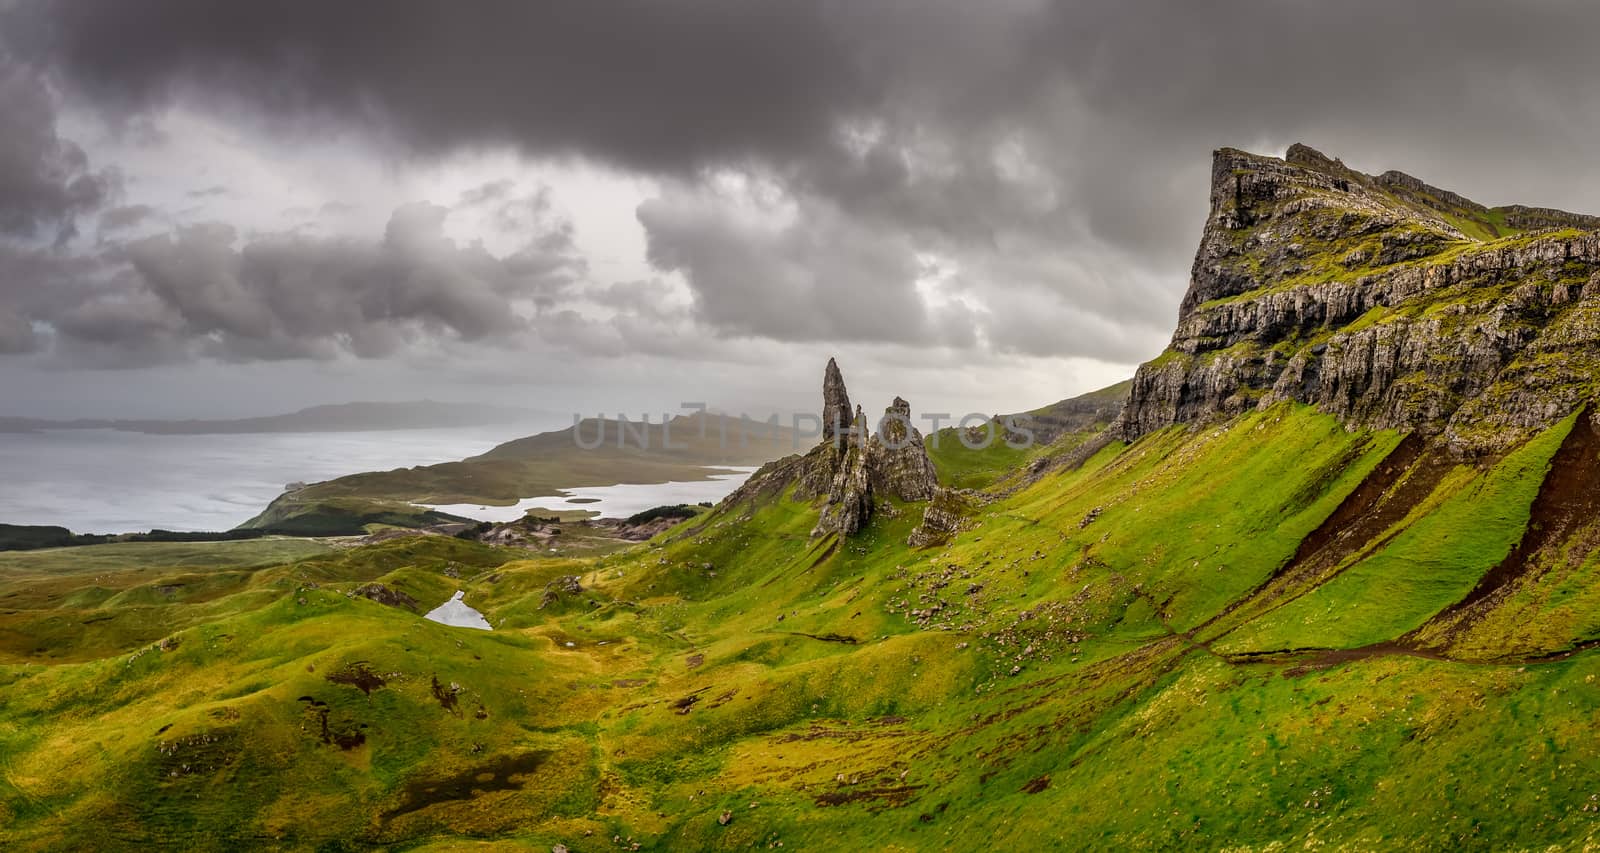 Panoramic view of Old man of Storr mountains, Scottish highlands by martinm303